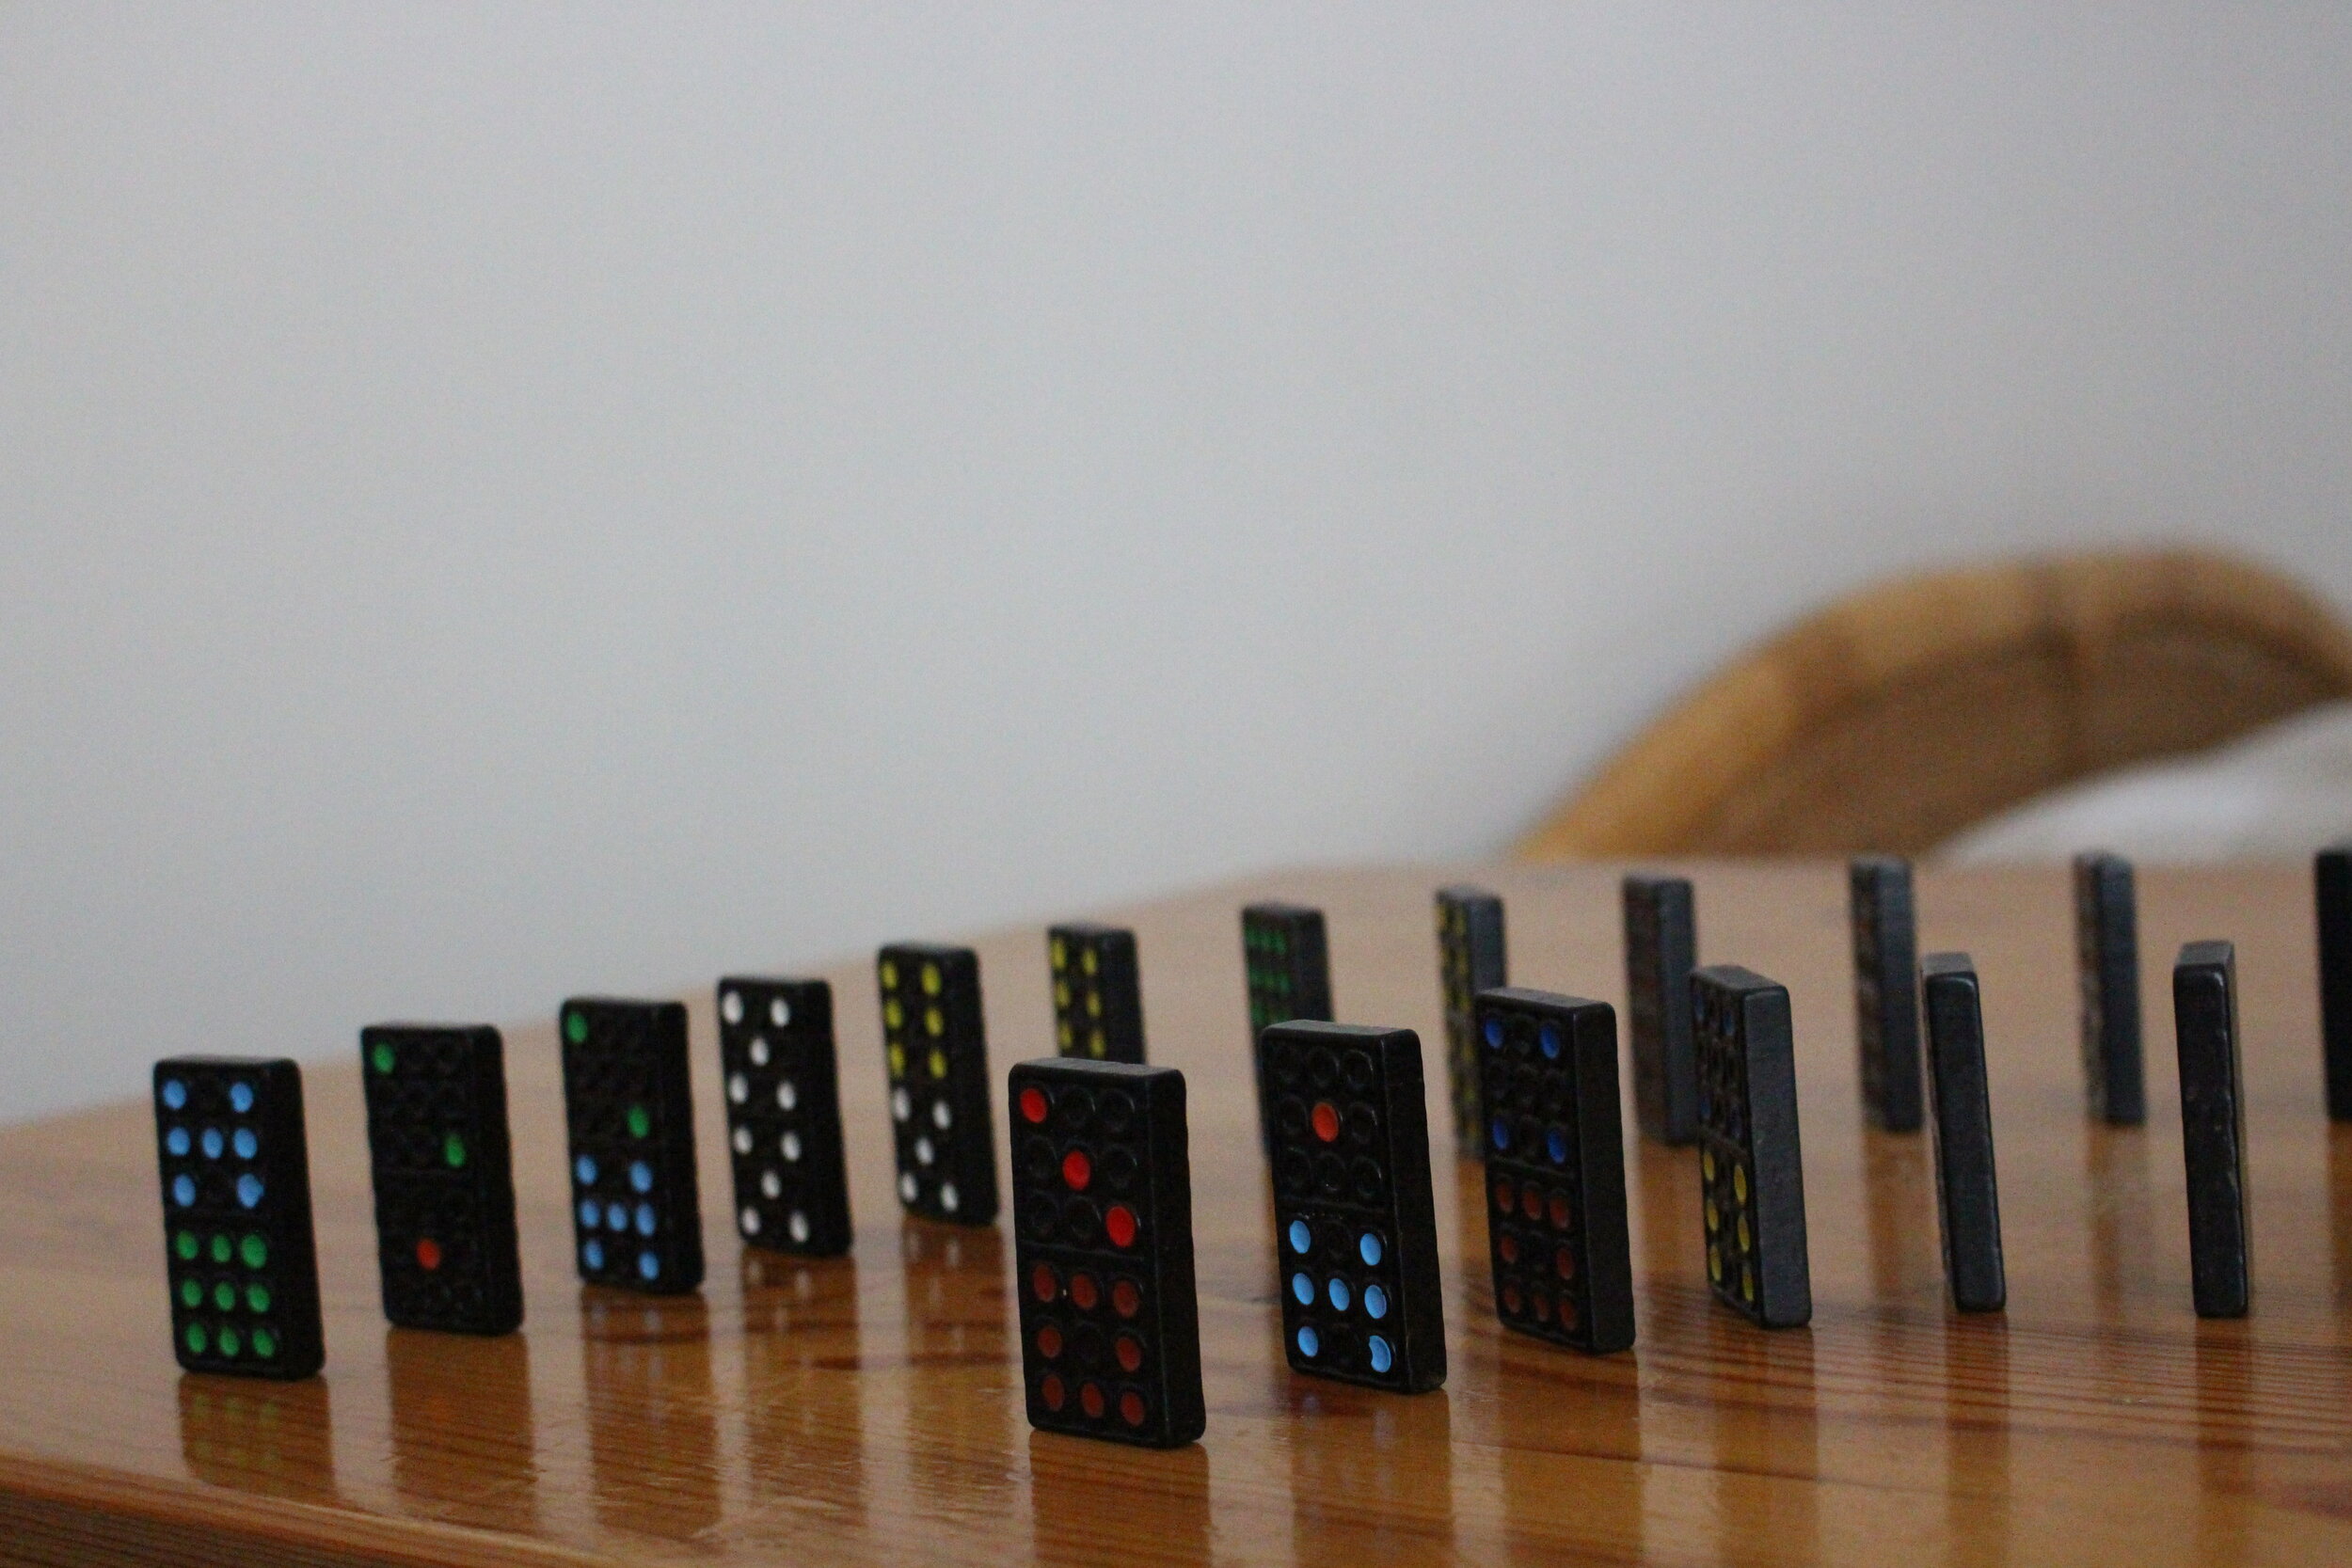 Each domino does only one thing: once it receives force, it falls over.